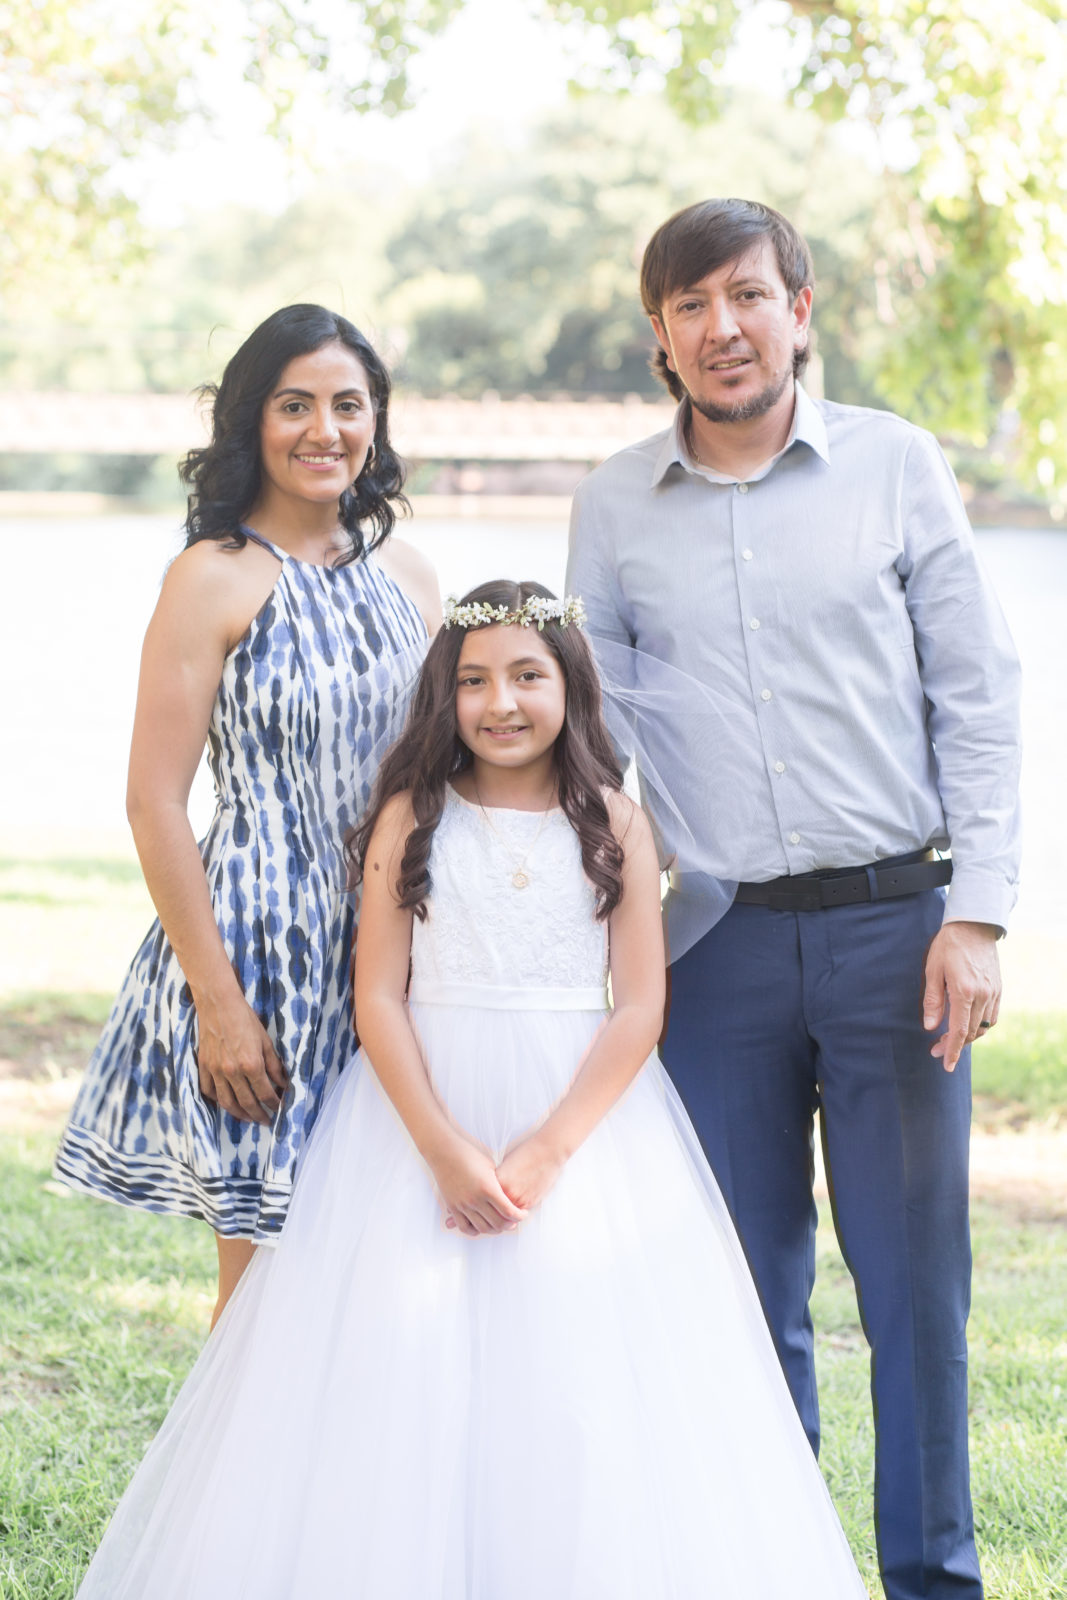 Mom and dad pose with daughter for first communion photos with event photographer Wisp + Willow Photography Co